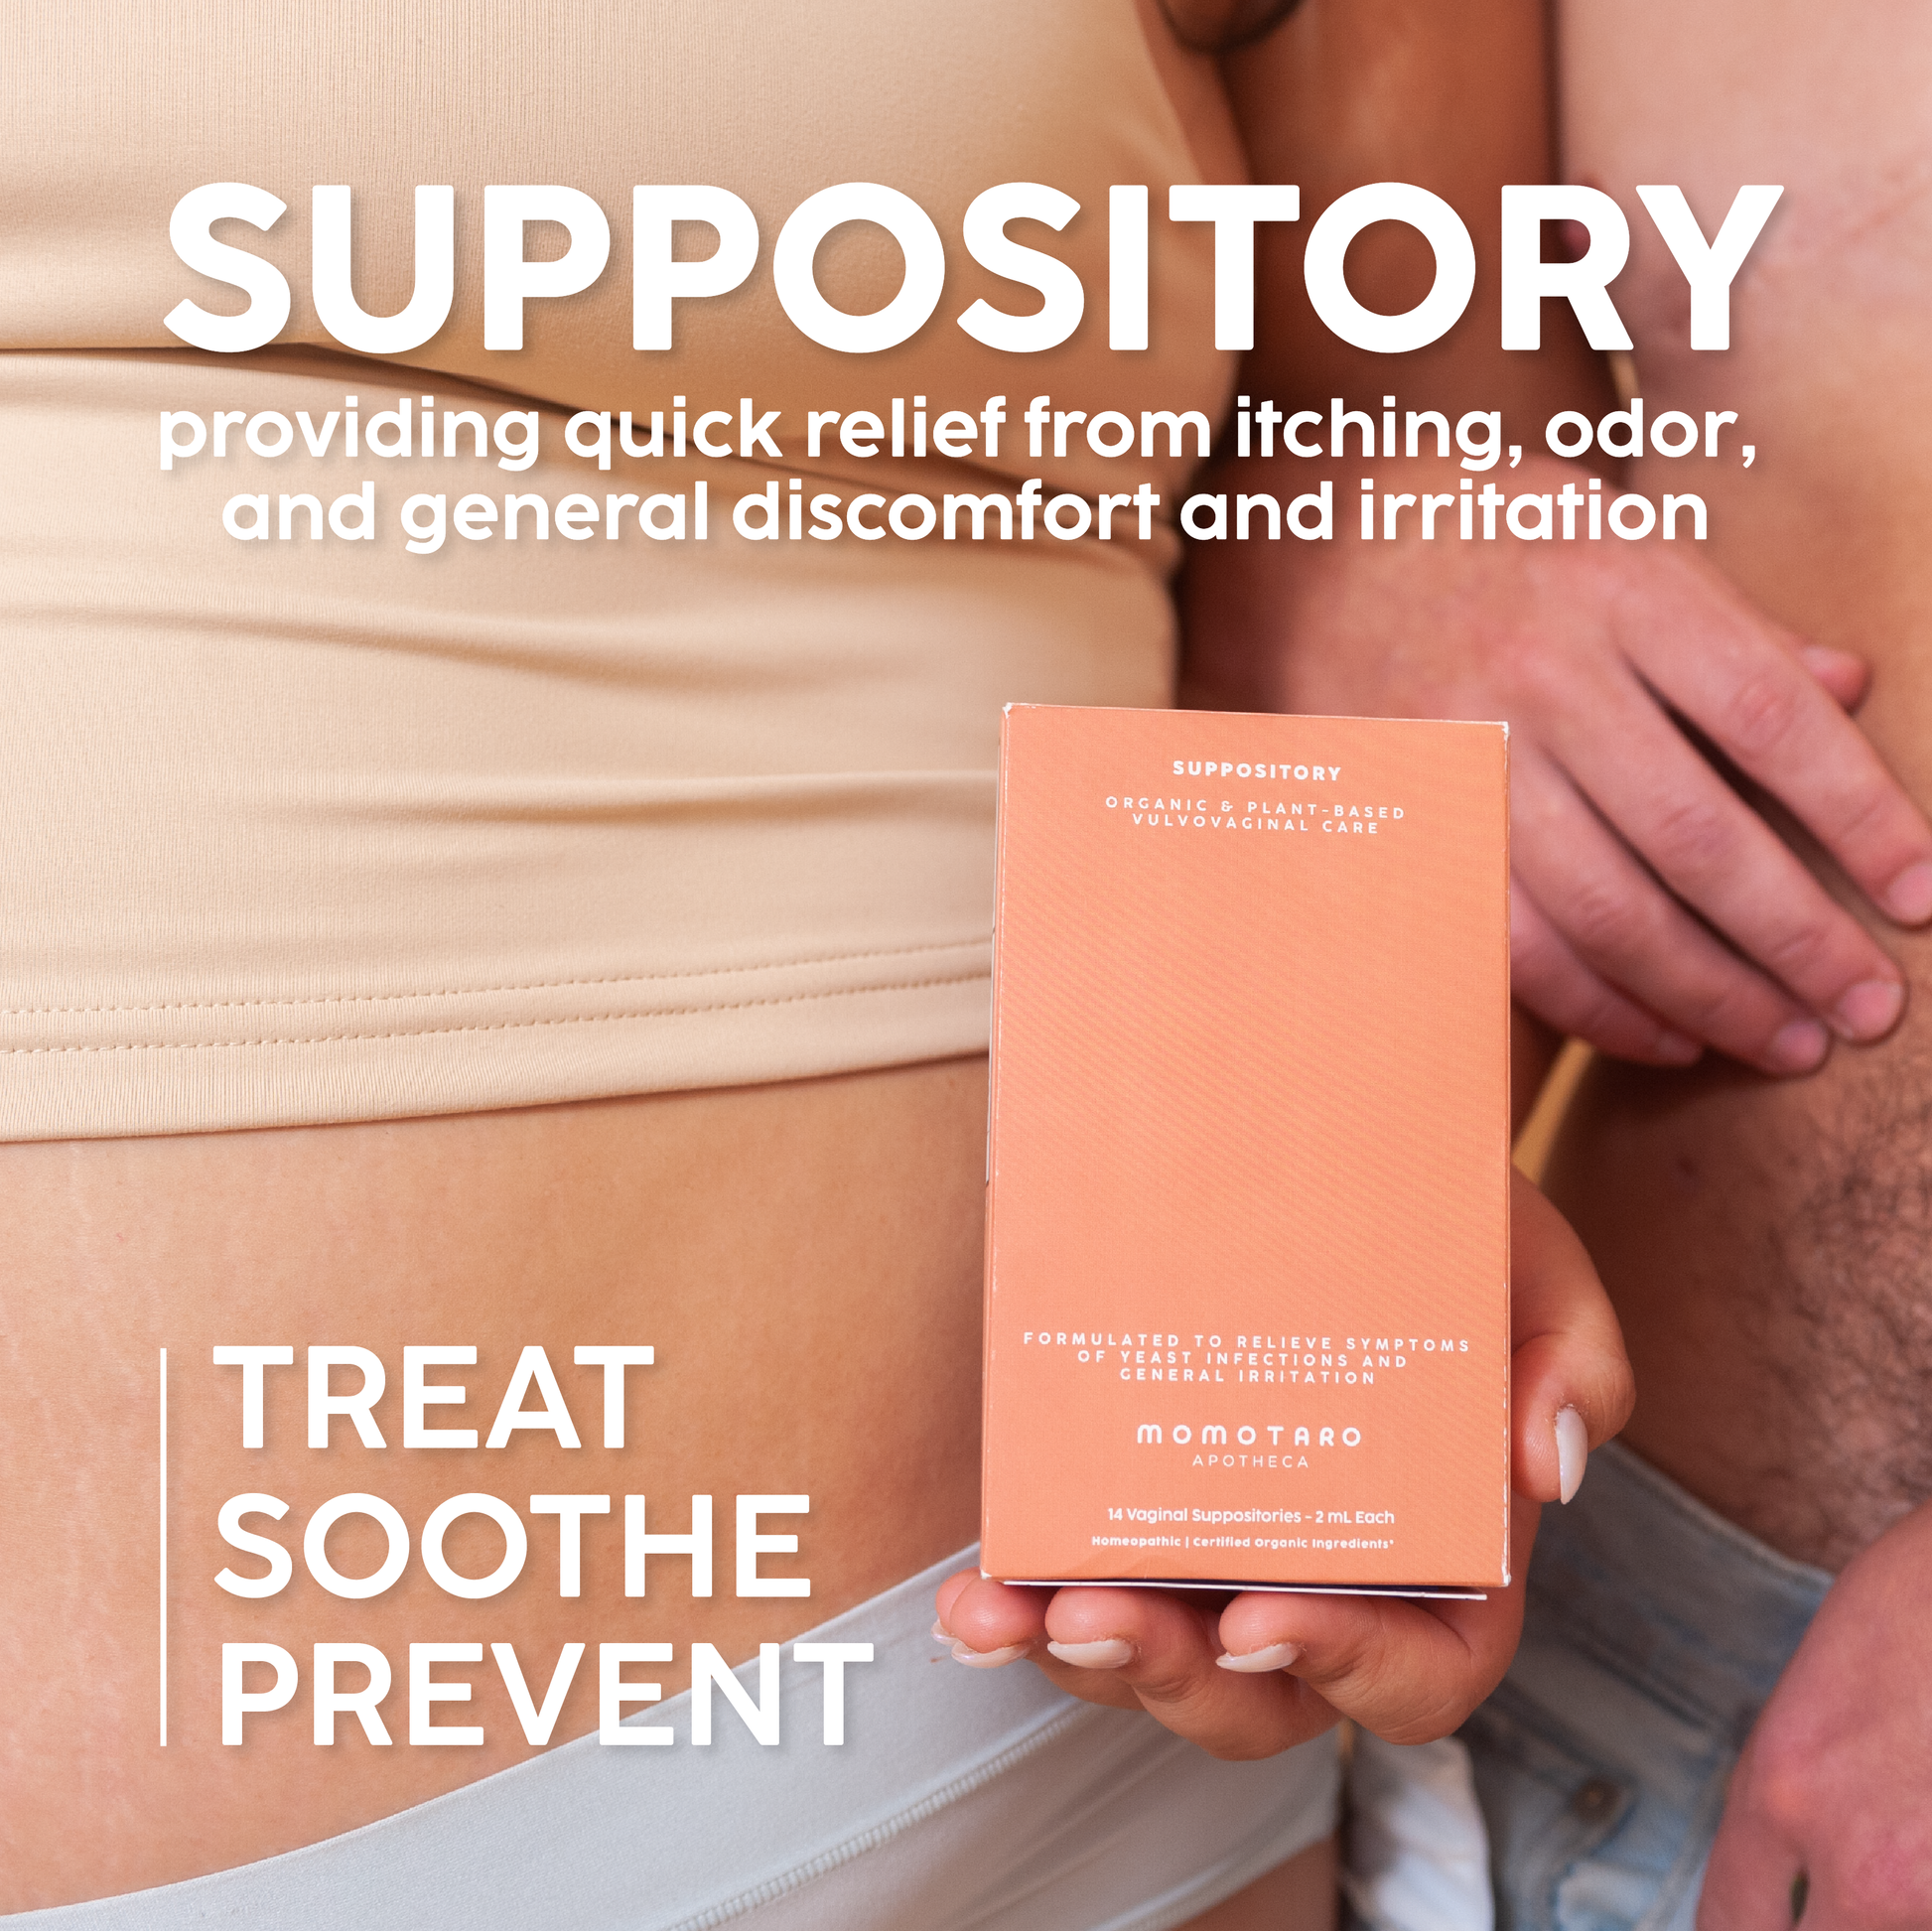 Suppository - Treat, Soothe, and Prevent